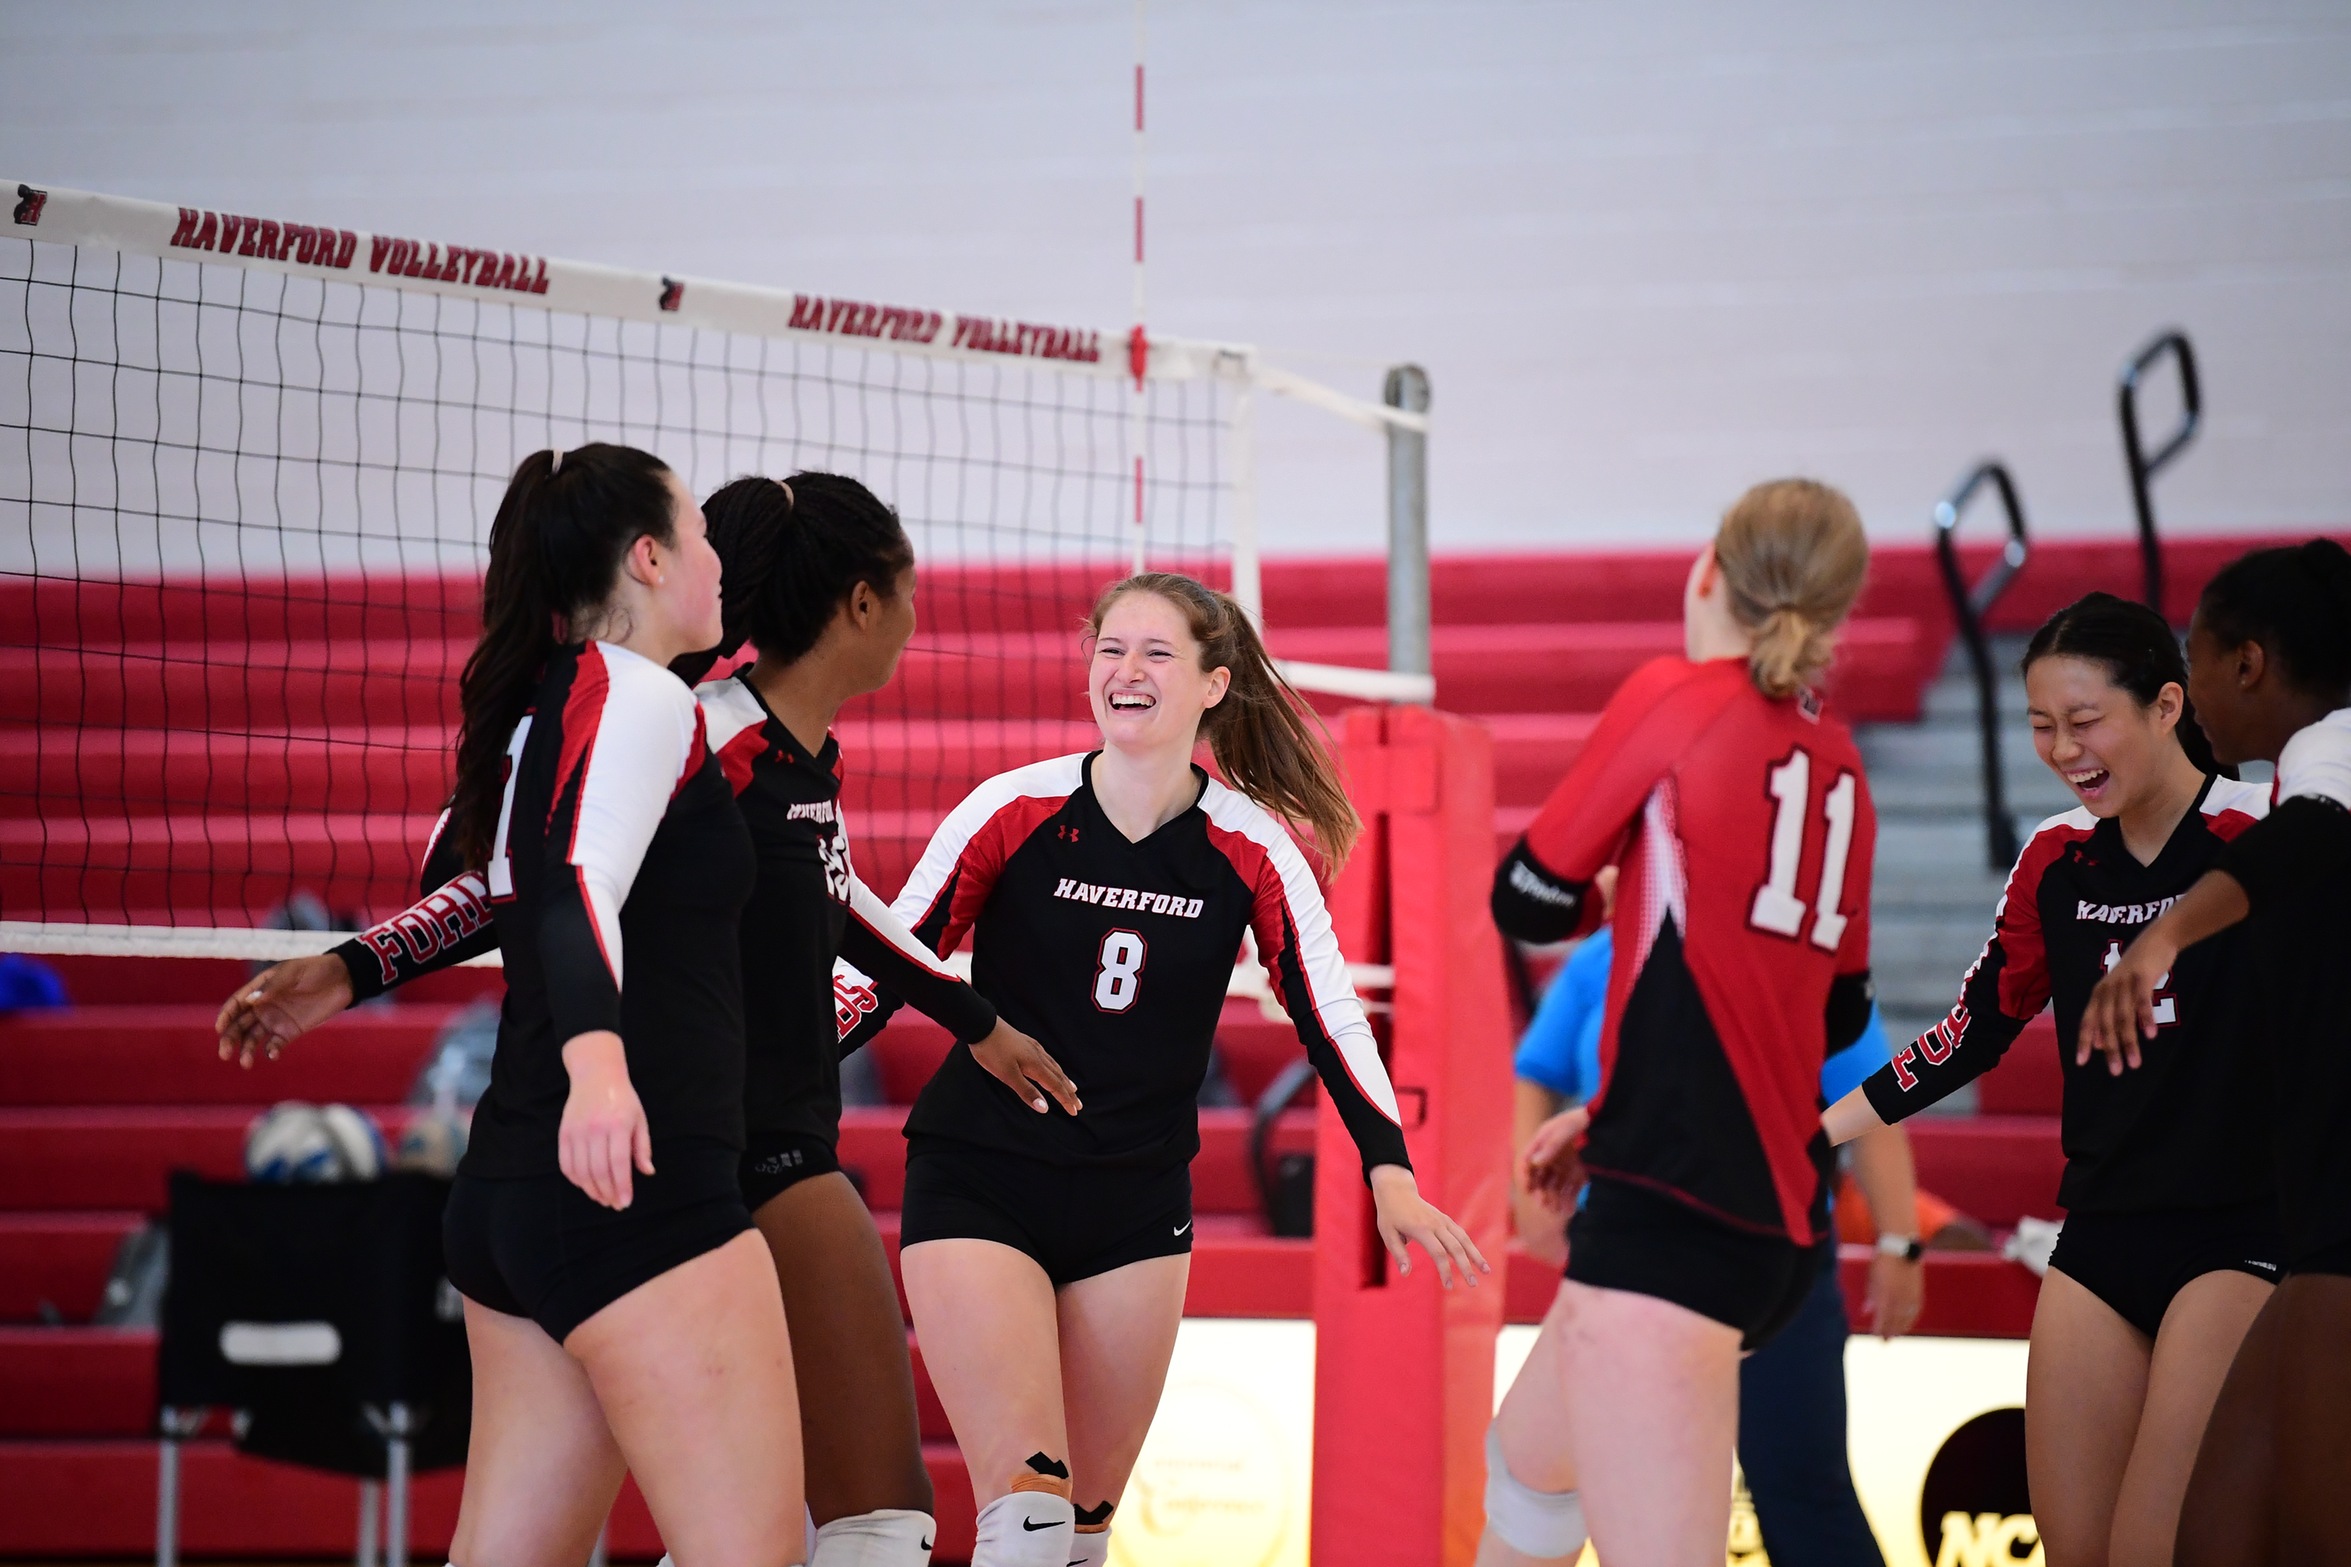 Volleyball Sweeps Past Dickinson, 3-0